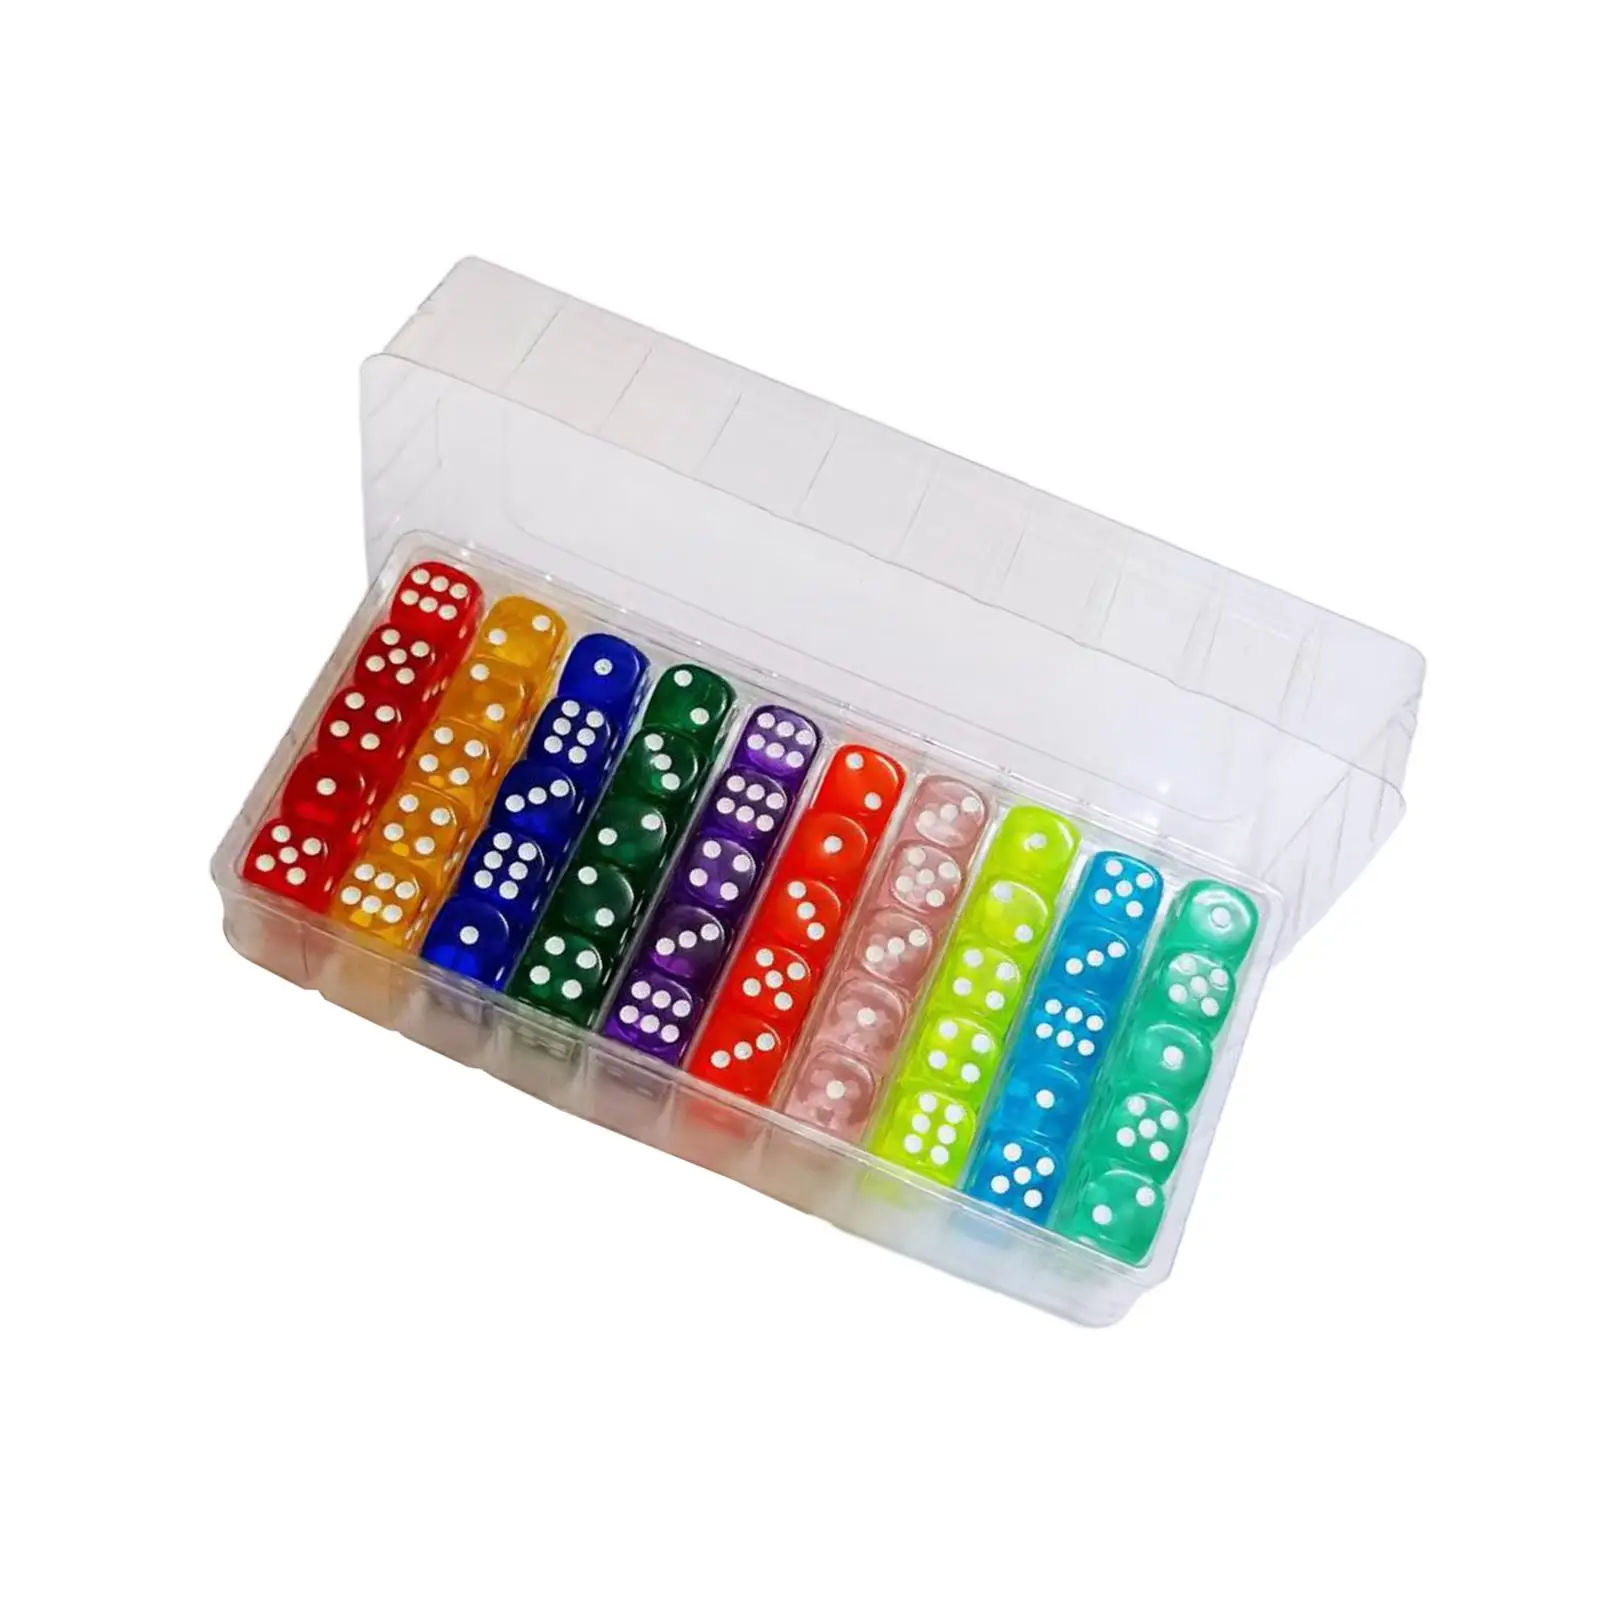 100Pcs 6 Sided Games Dice Set Translucent Colors Round Corner Acrylic Dice 14mm for Playing Games Math Learning Party Favors